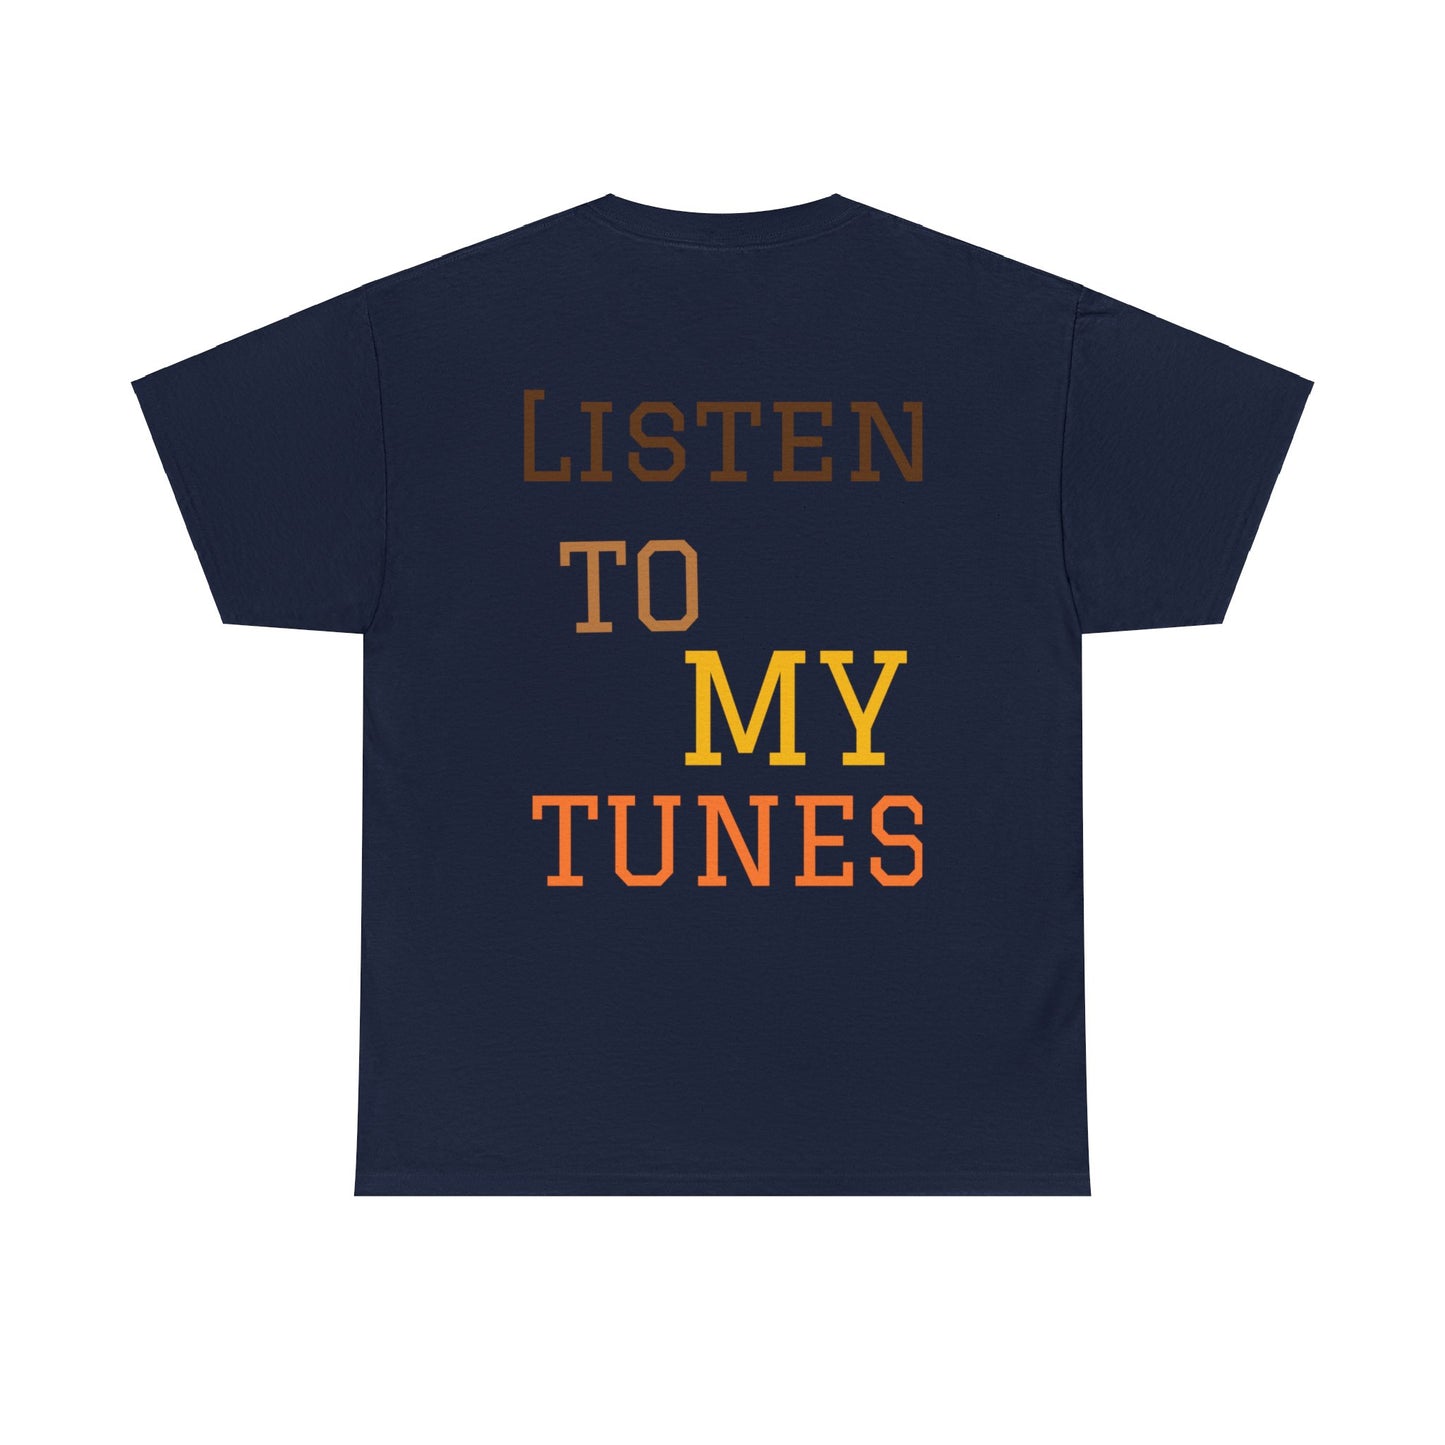 WOW!!! On~point, (Music Video Theme), "LISTEN TO MY TUNES" T-Shirt!!!!!